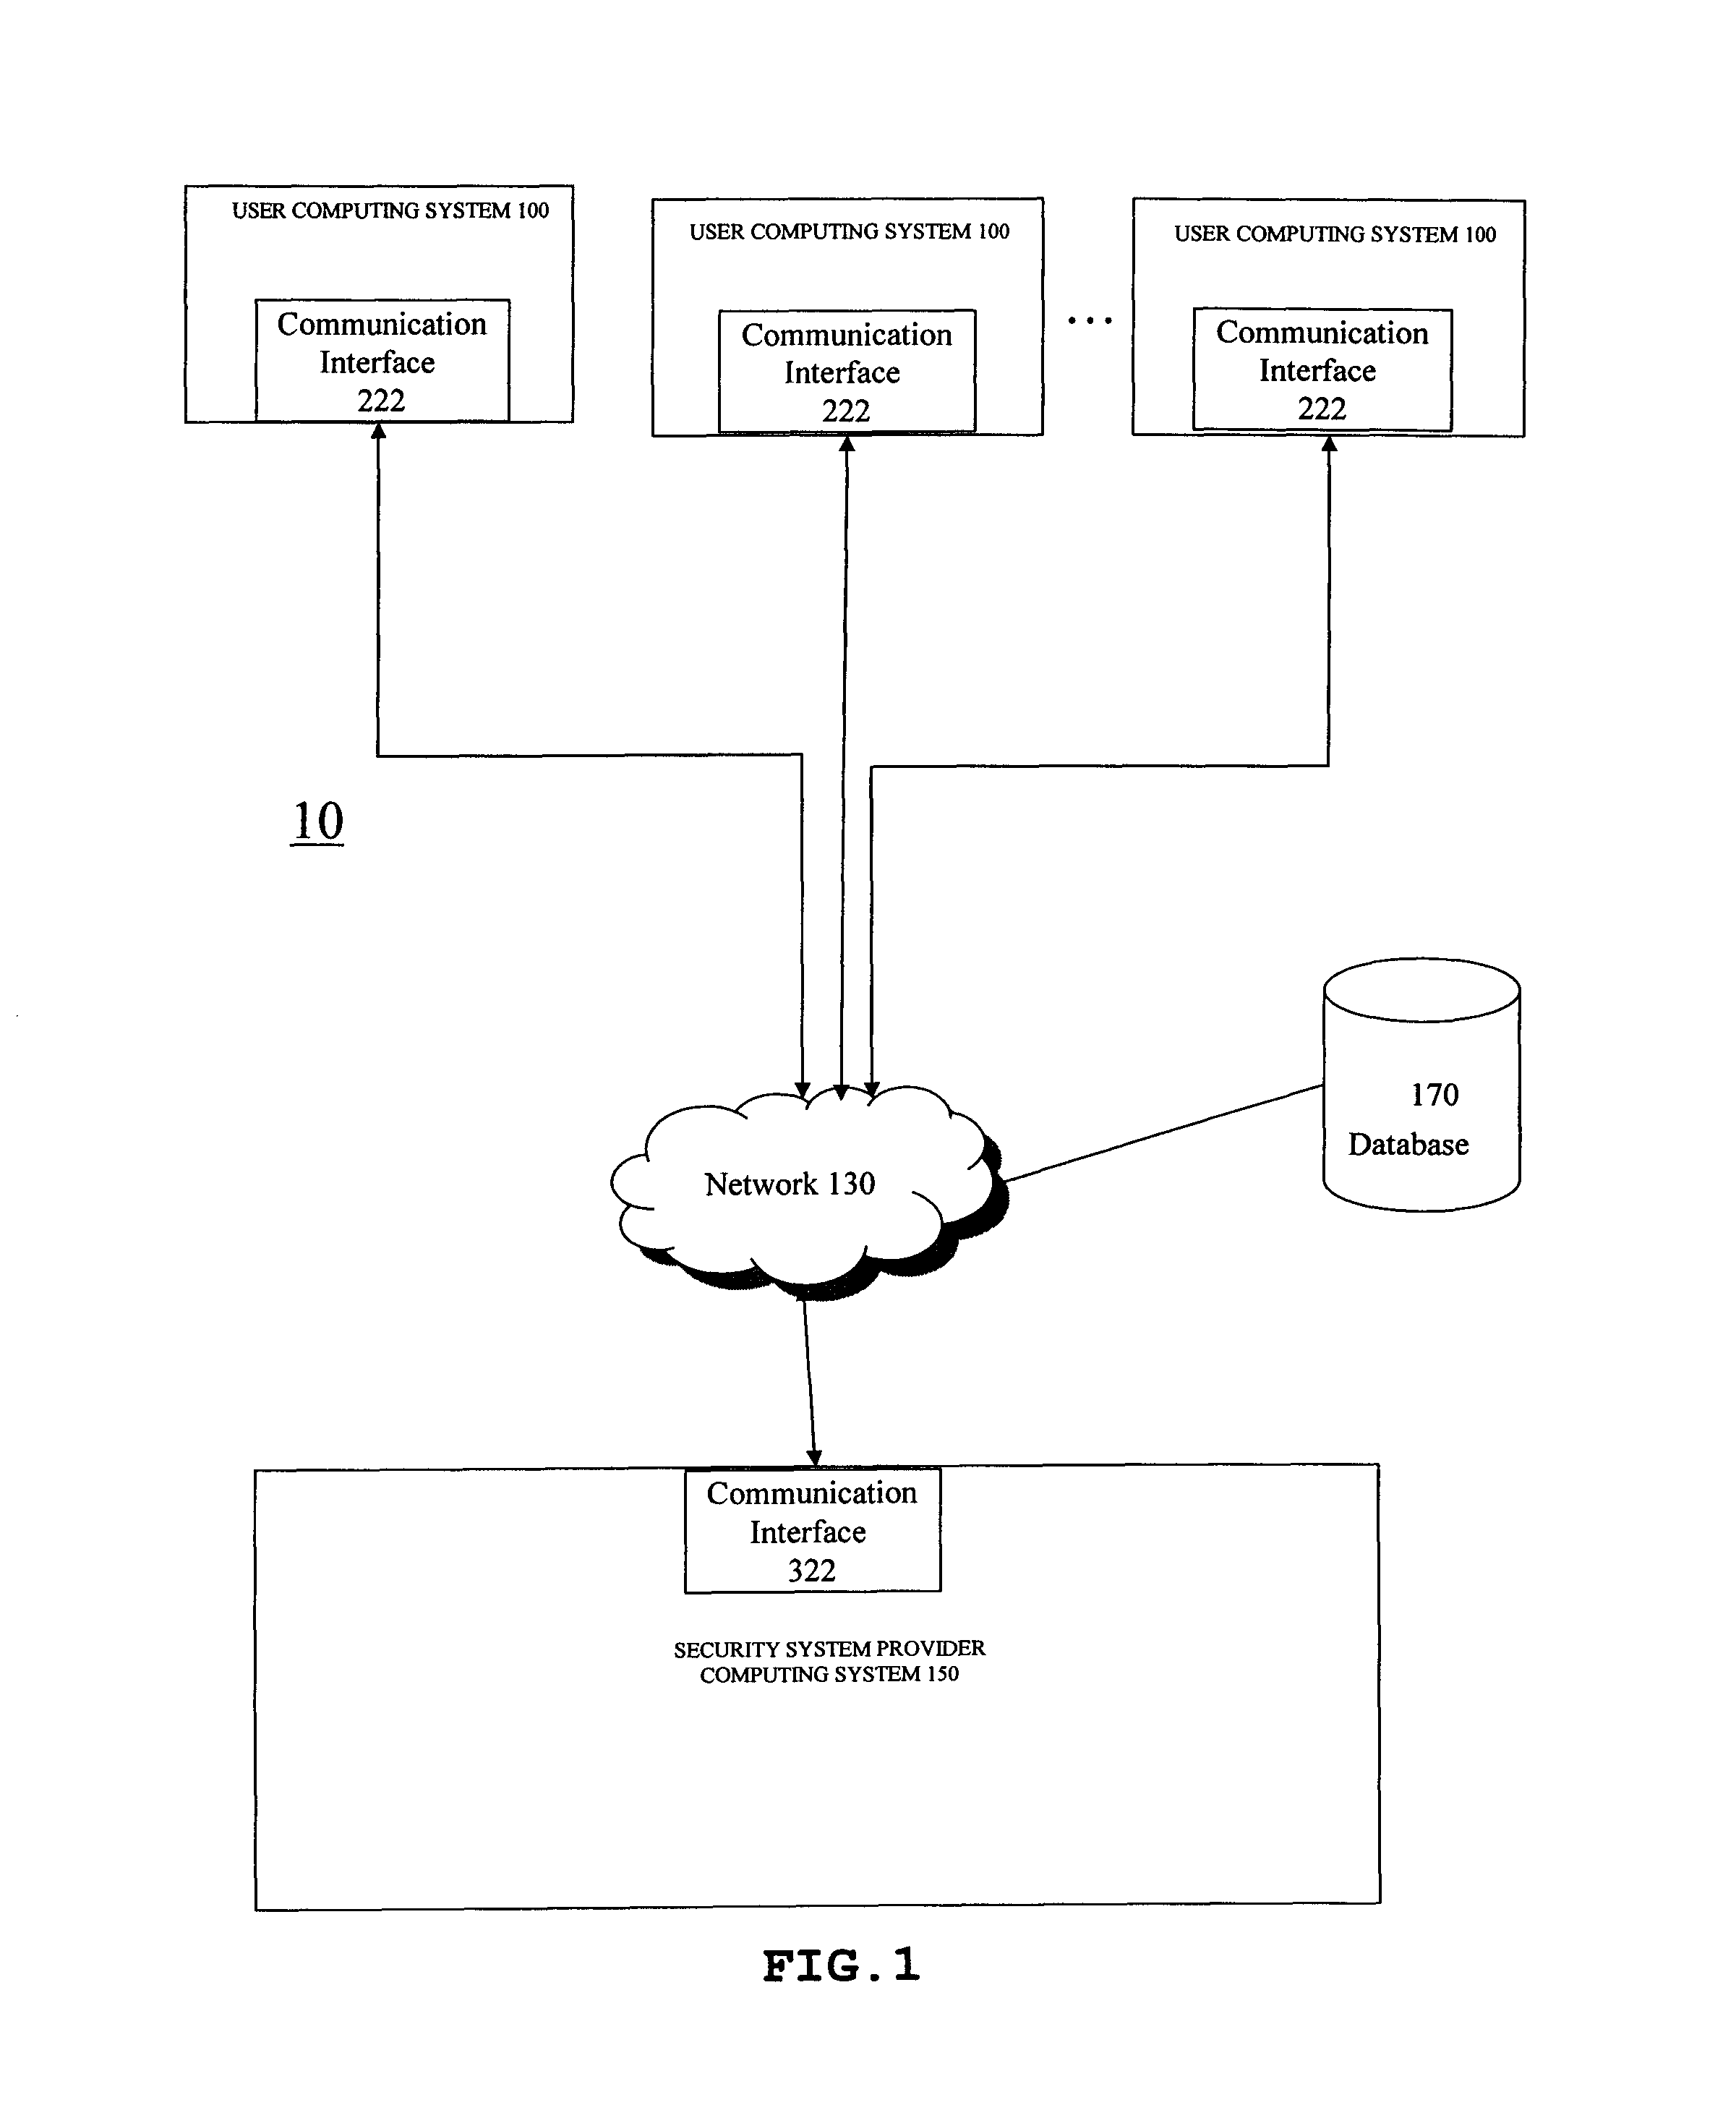 Method and system for detecting malware containing E-mails based on inconsistencies in public sector "From" addresses and a sending IP address